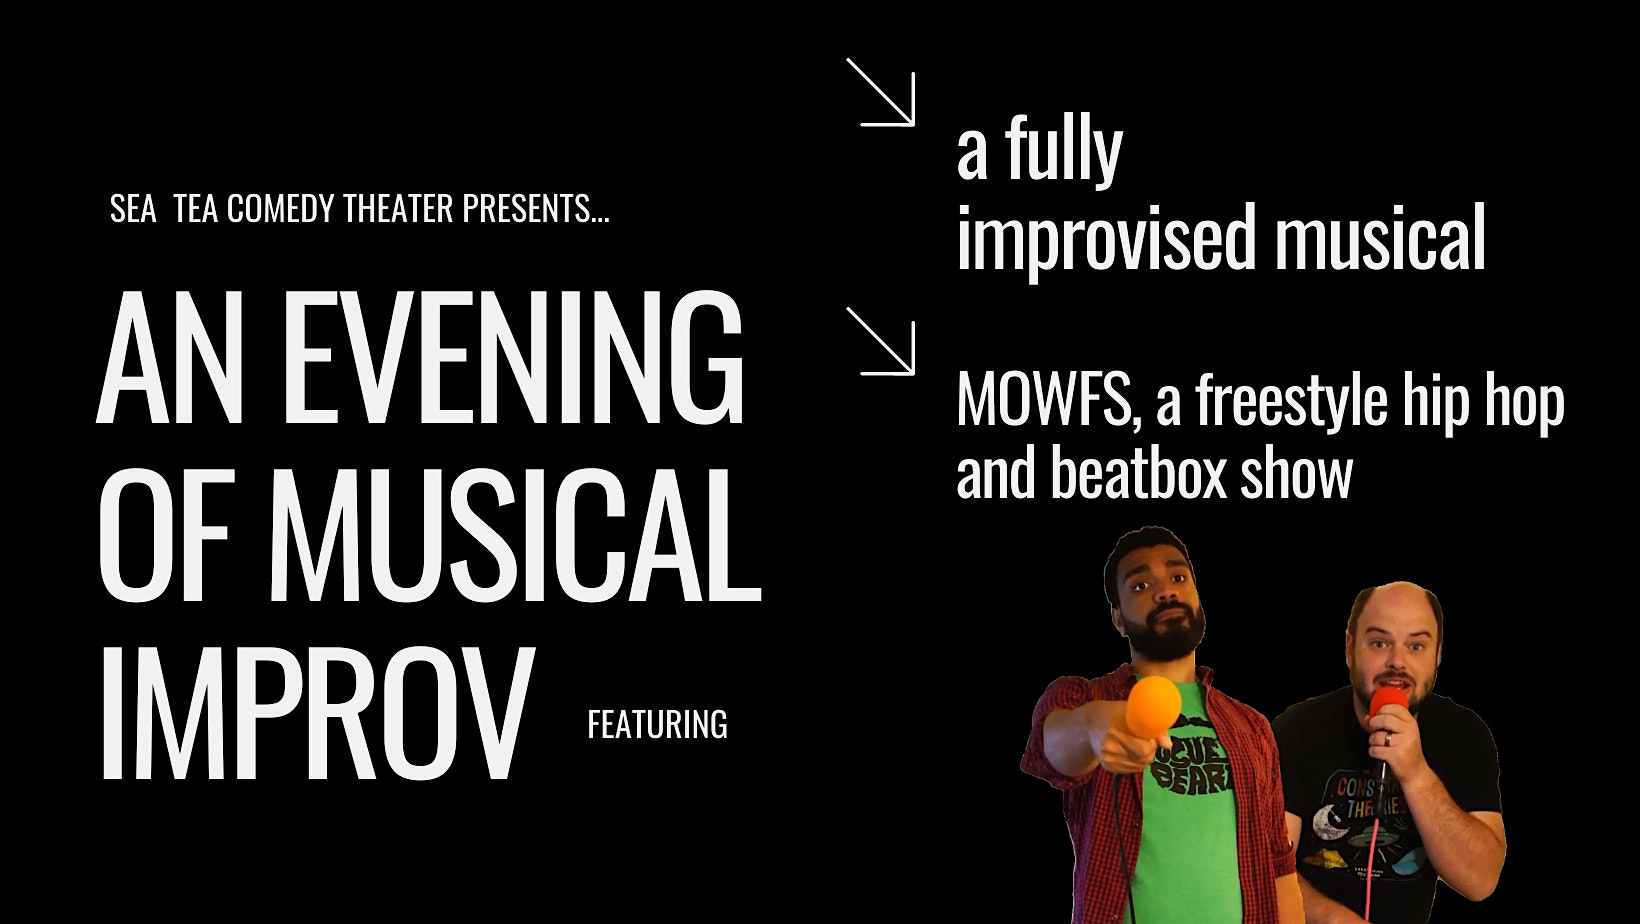 An Evening of Musical Improv feat. A Fully Improvised Musical & MOWFS